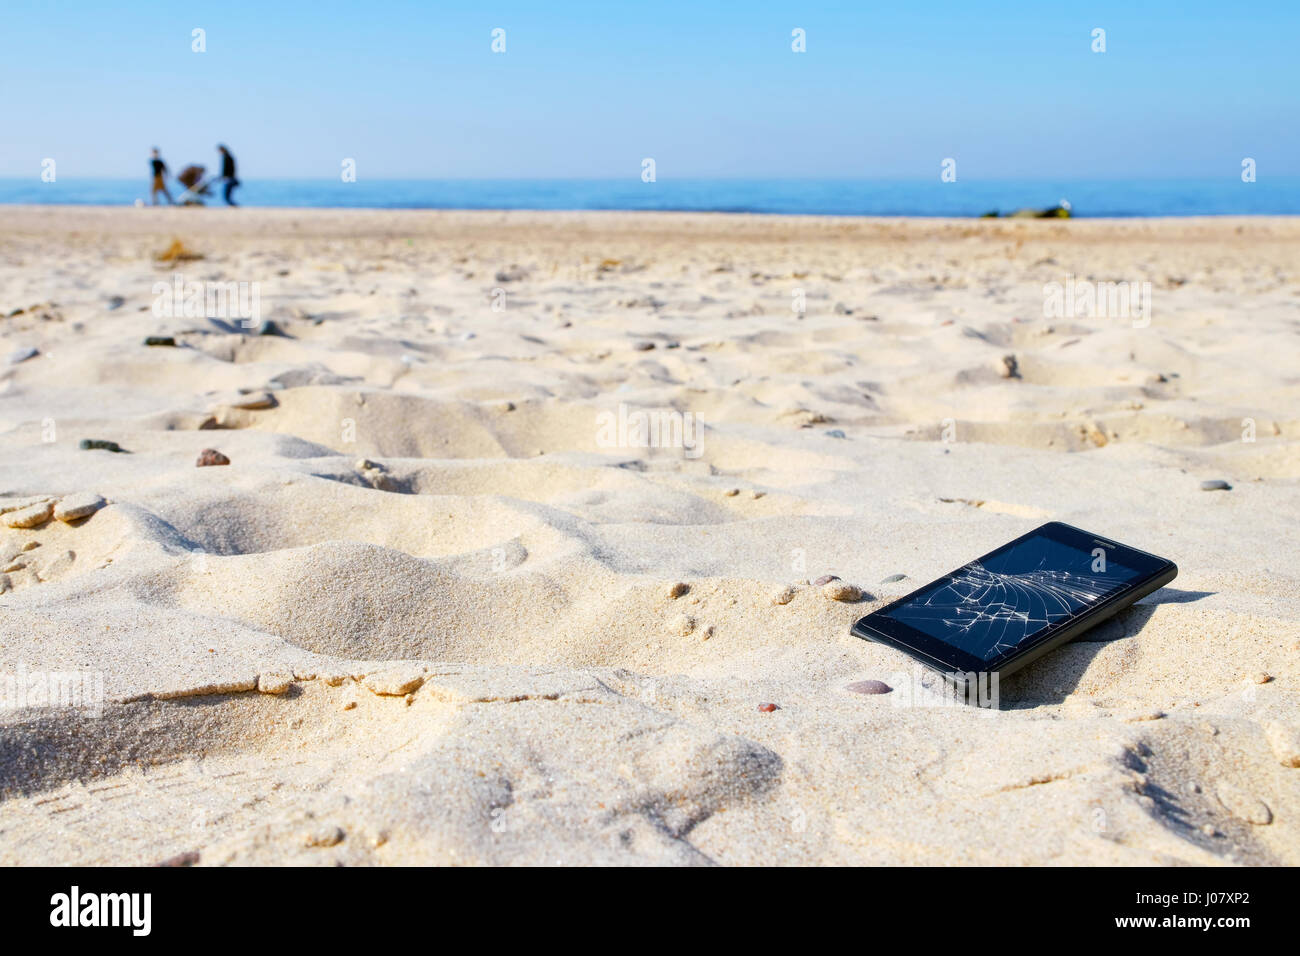 Mobile phone with broken screen in sand on a beach, selective focus. Stock Photo